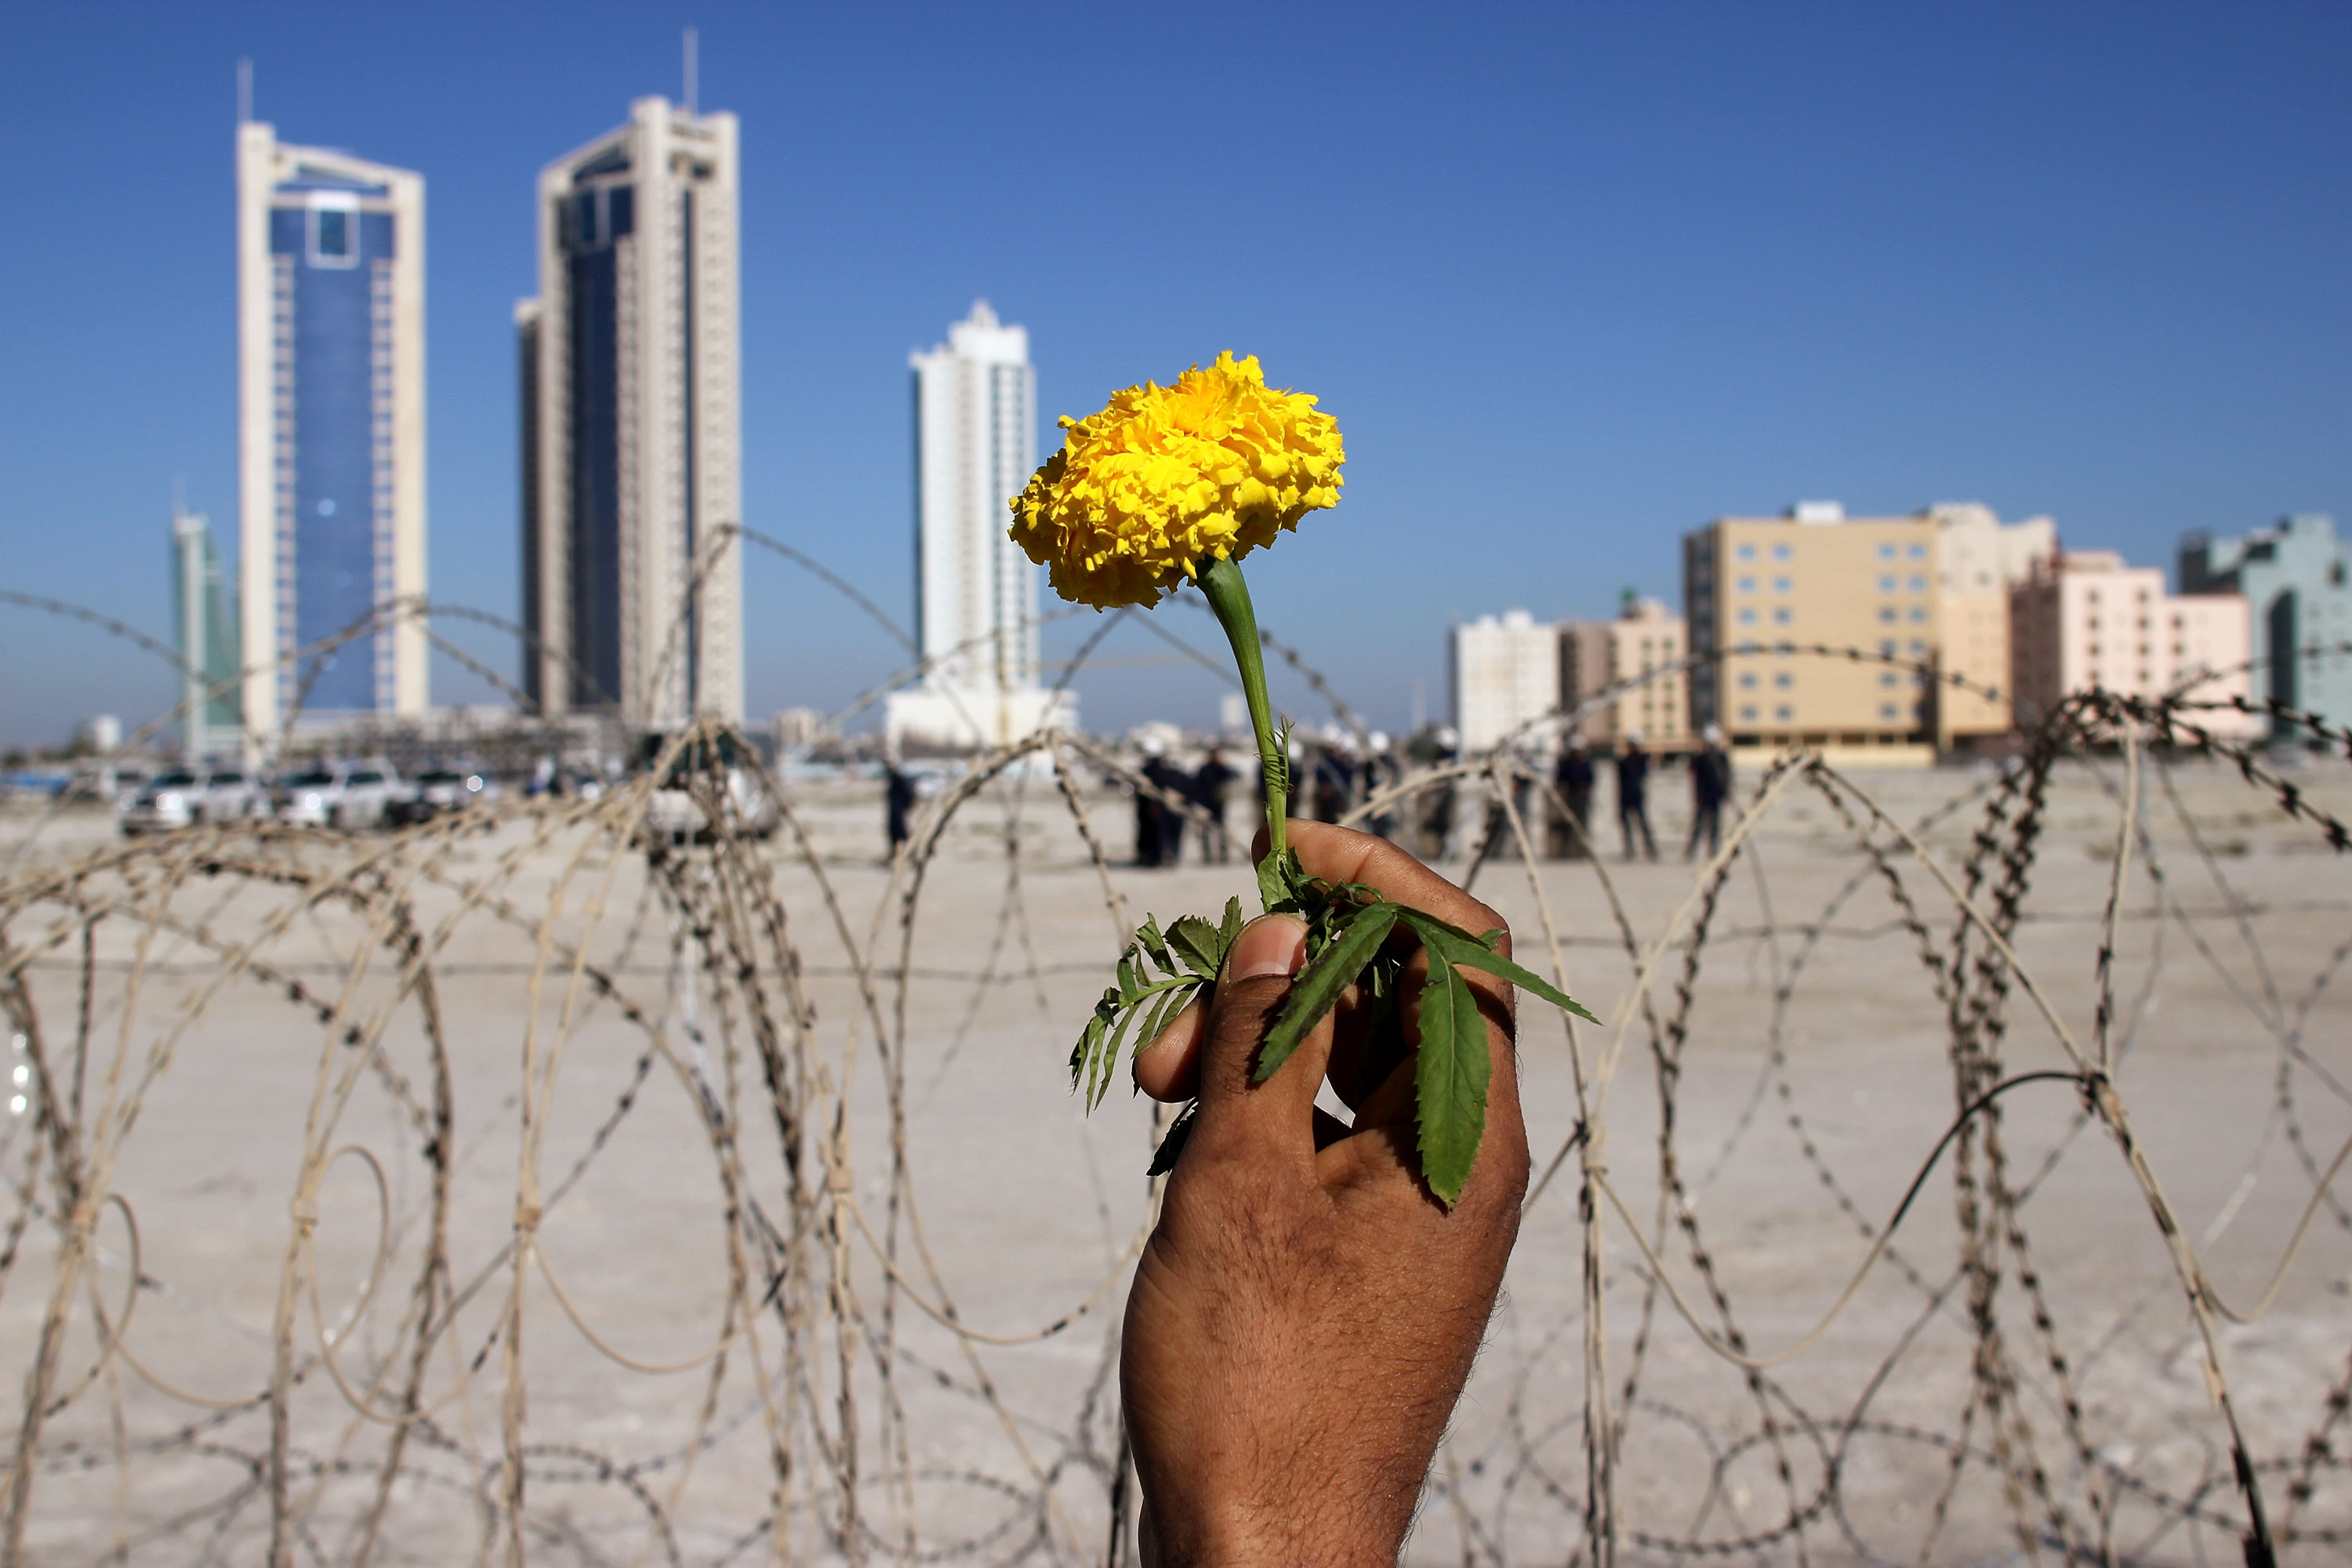 MANAMA, BAHRAIN - FEBRUARY 19:  A person holds a flower in front of a barbed wire fence as anti-government demonstrators re-occupy Pearl roundabout on February 19, 2011 in Manama, Bahrain. Anti-government protesters were fired at with tear gas and rubber bullets as they marched to retake the roundabout, injuring several protestors at the site of two deadly previous confrontations between police and demonstrators. The Bahrain military has since backed off by order of Crown Prince Salman bin Hamad Al Khalifa, and instead police have been positioned to squelch the uprising.  (Photo by John Moore/Getty Images)